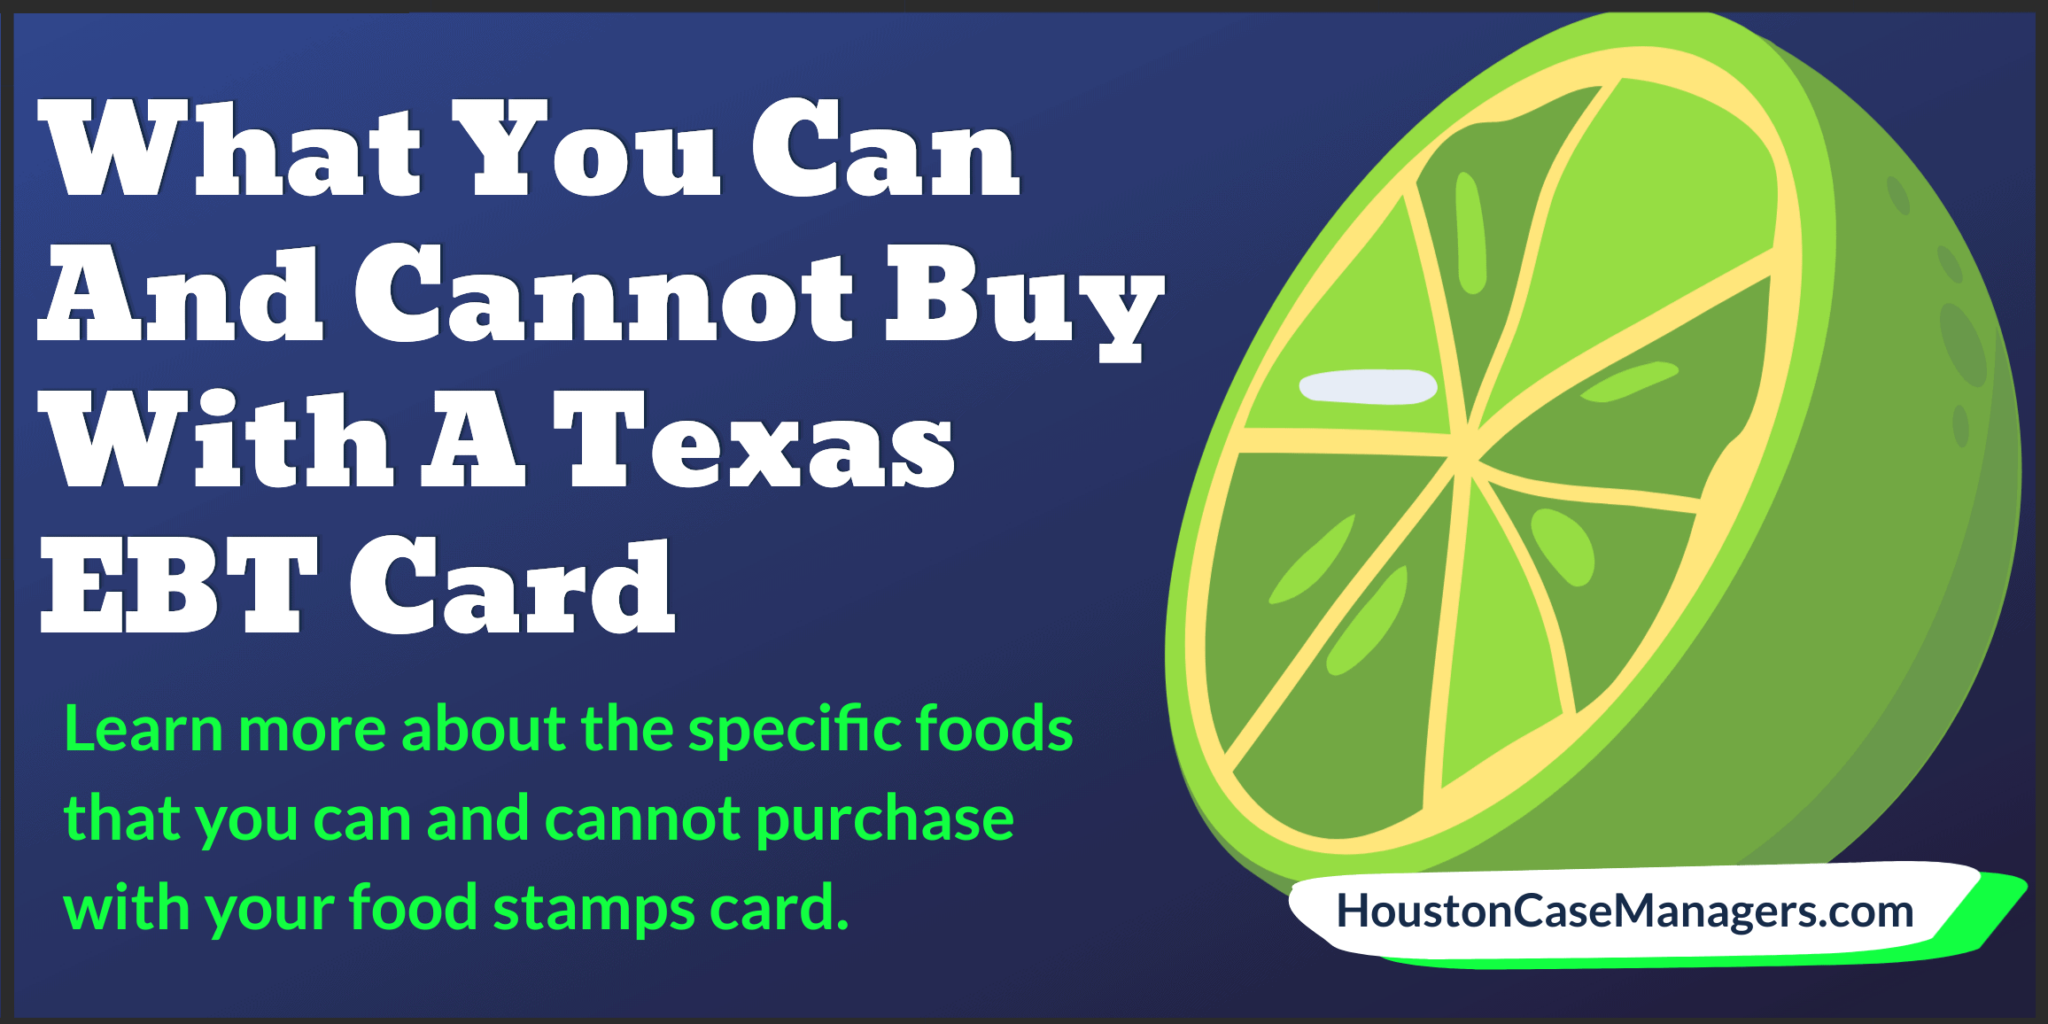 What You Can And Cannot Buy With A Texas EBT Card